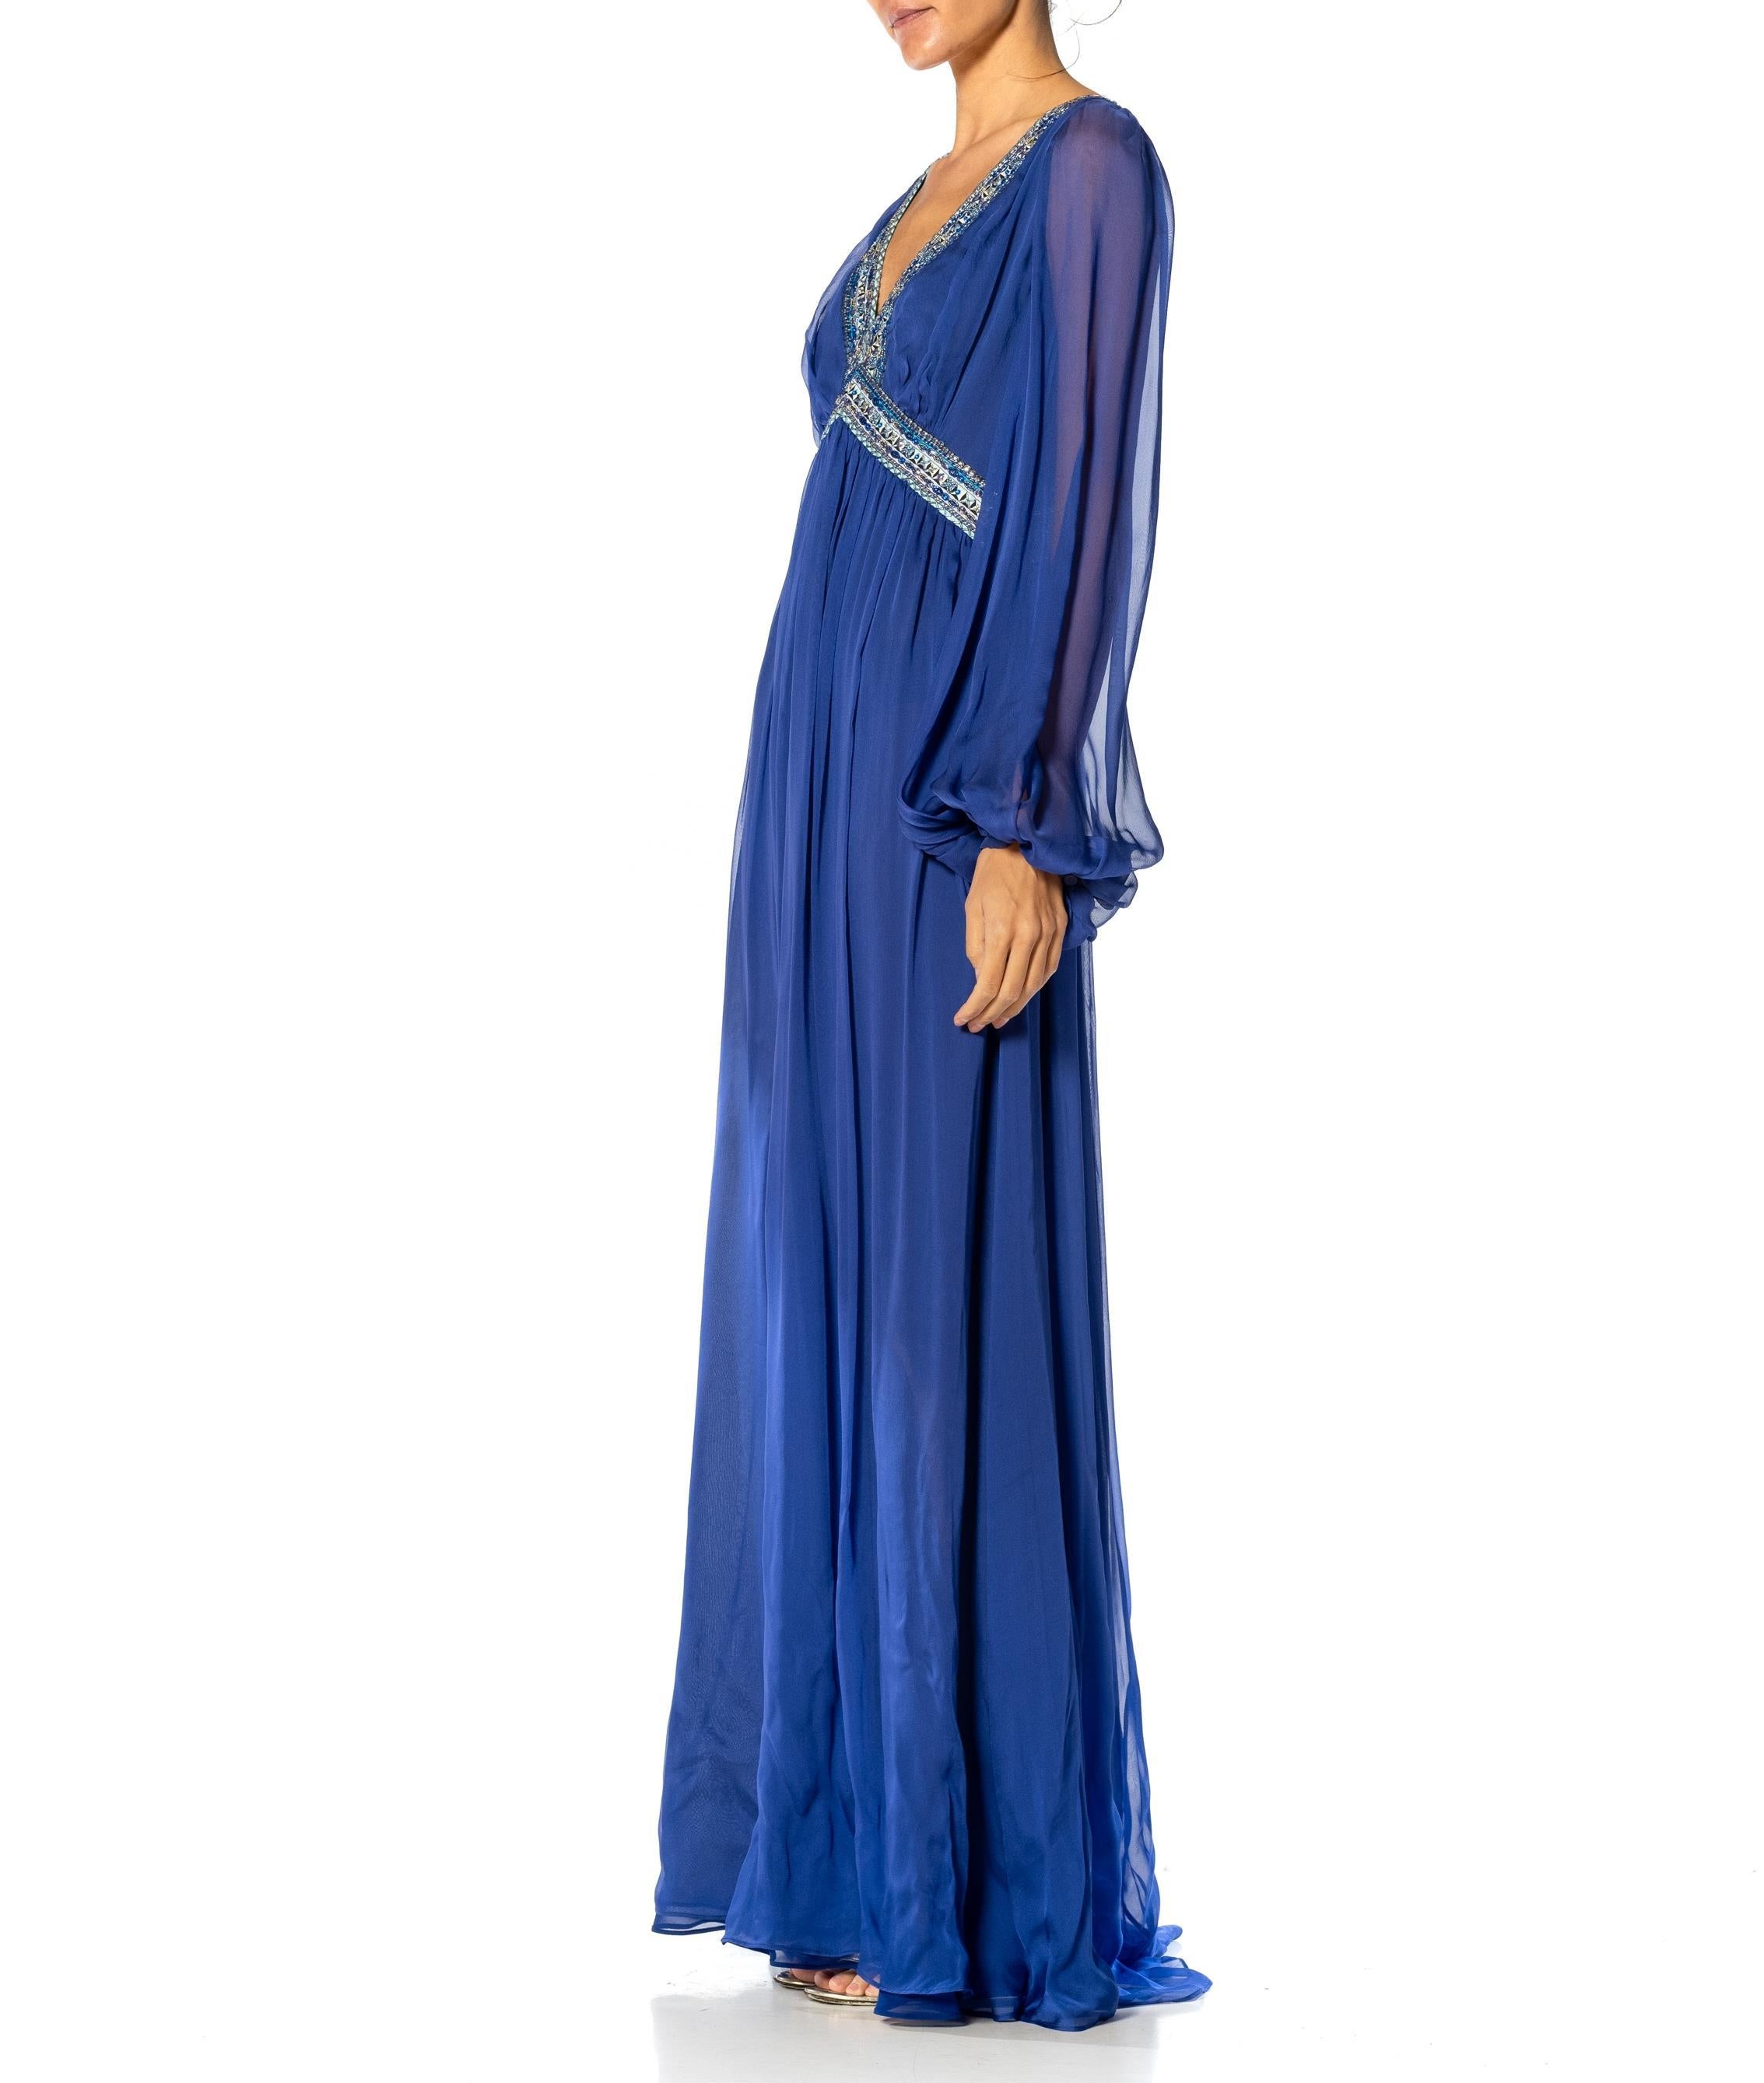 2000S EMILIO PUCCI Cobalt Blue Silk Chiffon Sleeved Gown With Beaded Print Details